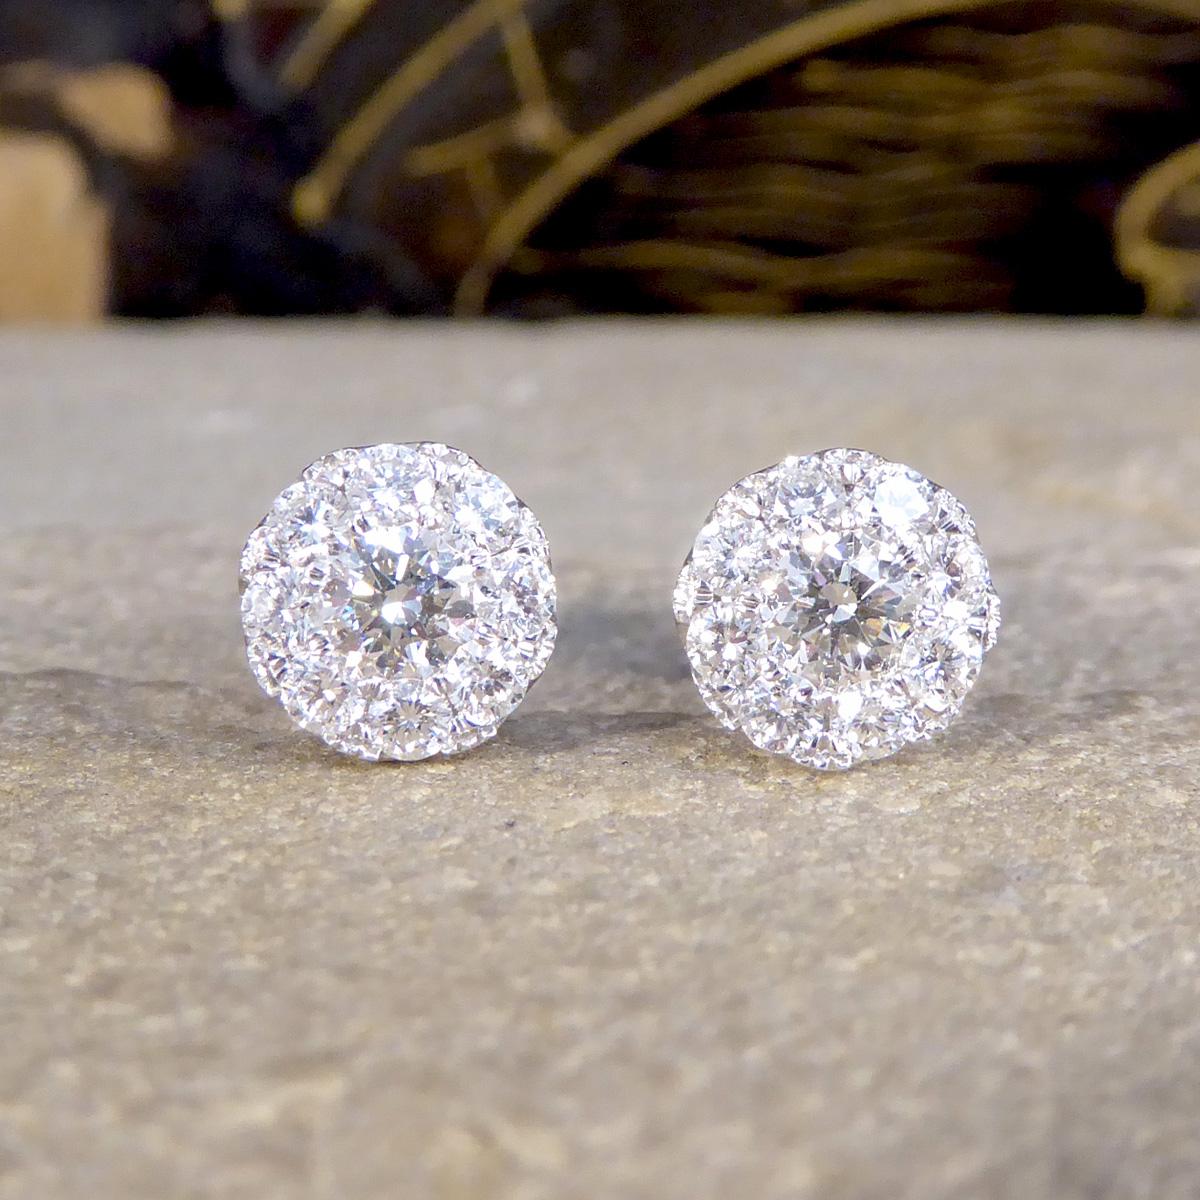 A beautifully sparkly pair of Dimond Earrings. At the heart of each stud features a carefully arranged cluster of diamonds with a total weight of 1.00ct, meticulously set to mimic the brilliance and size of a much larger, solitary diamond giving